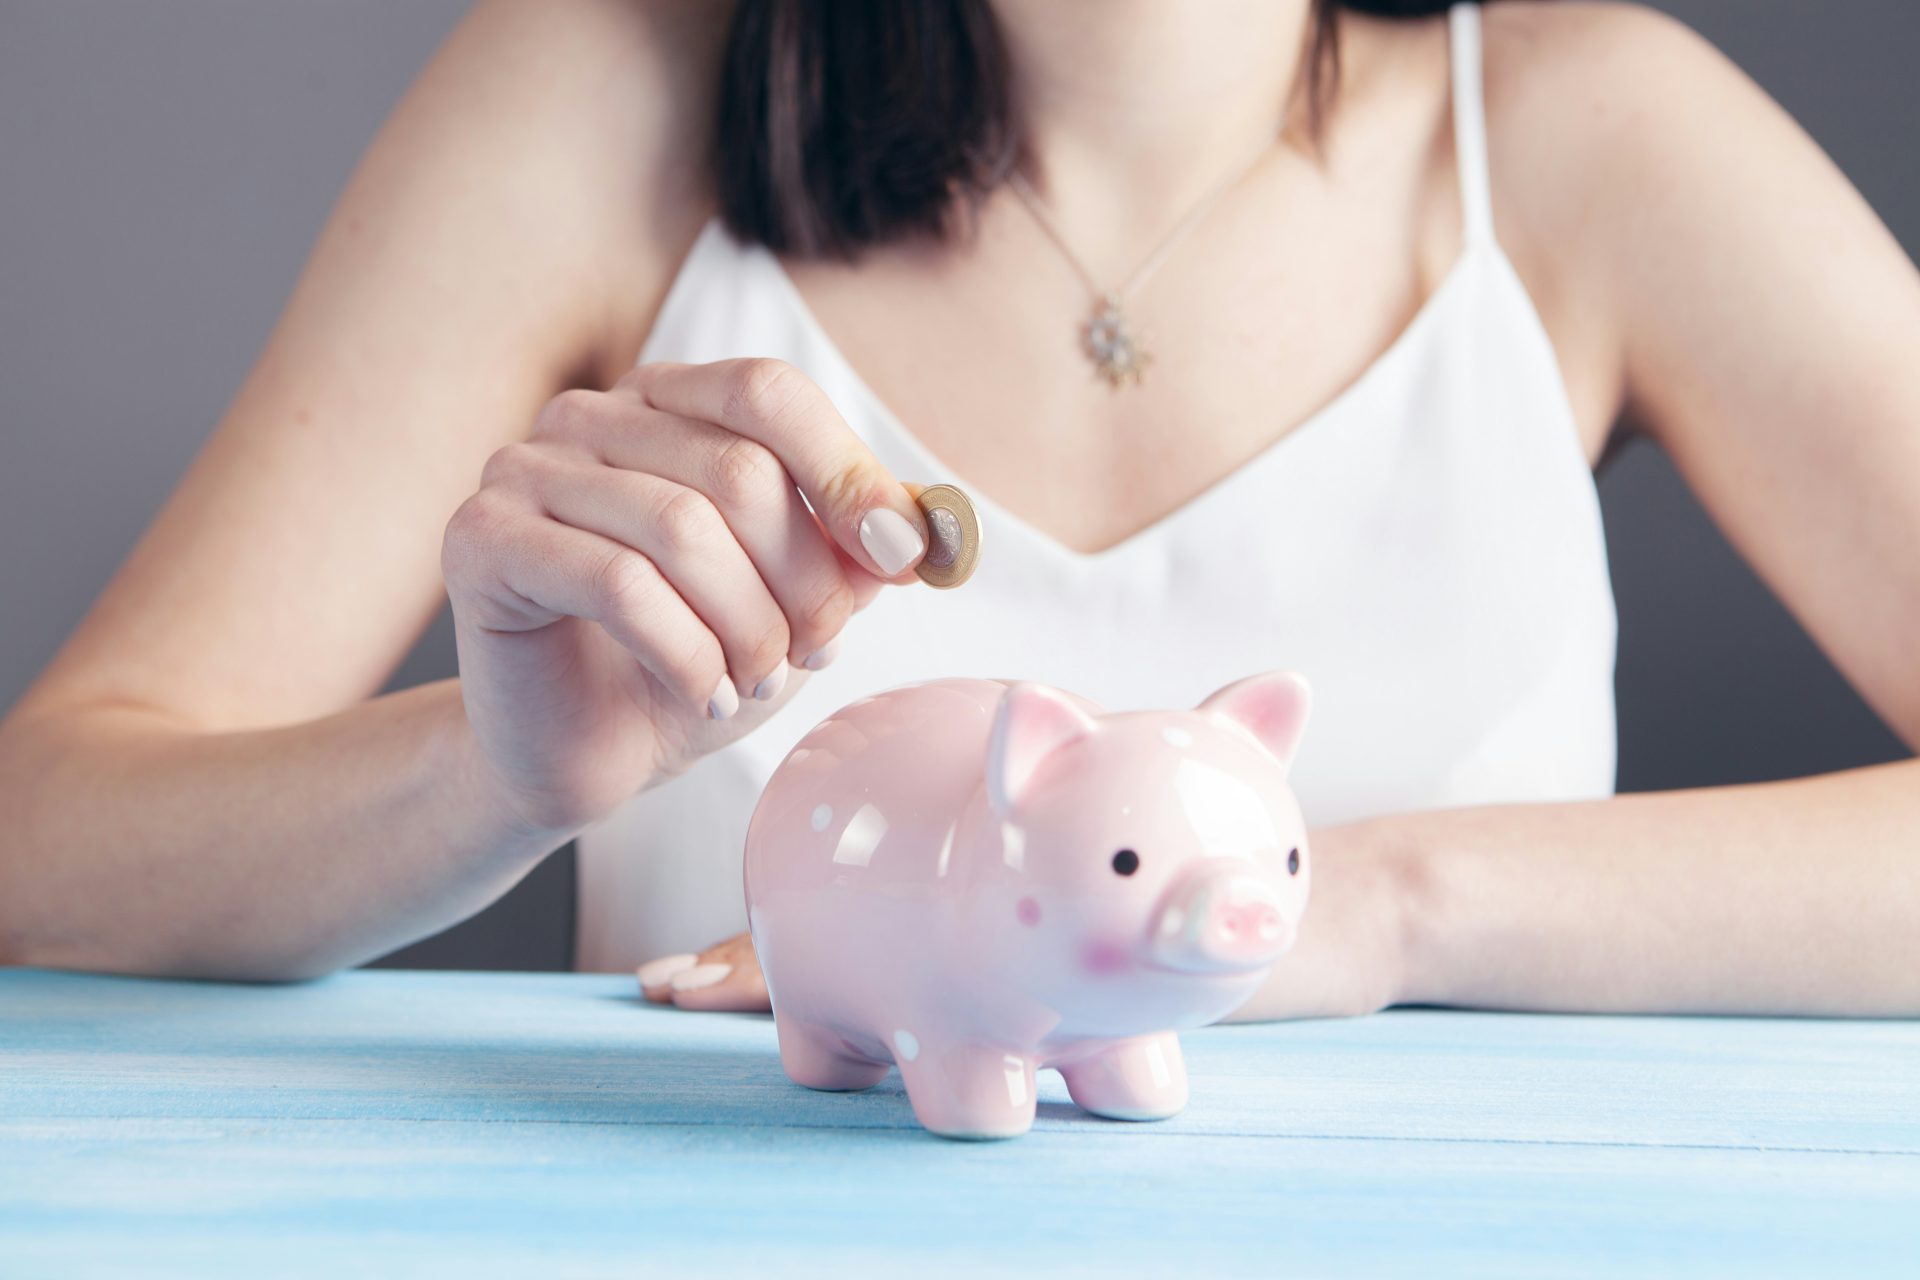 woman in white top putting a coin into a small piggy bank